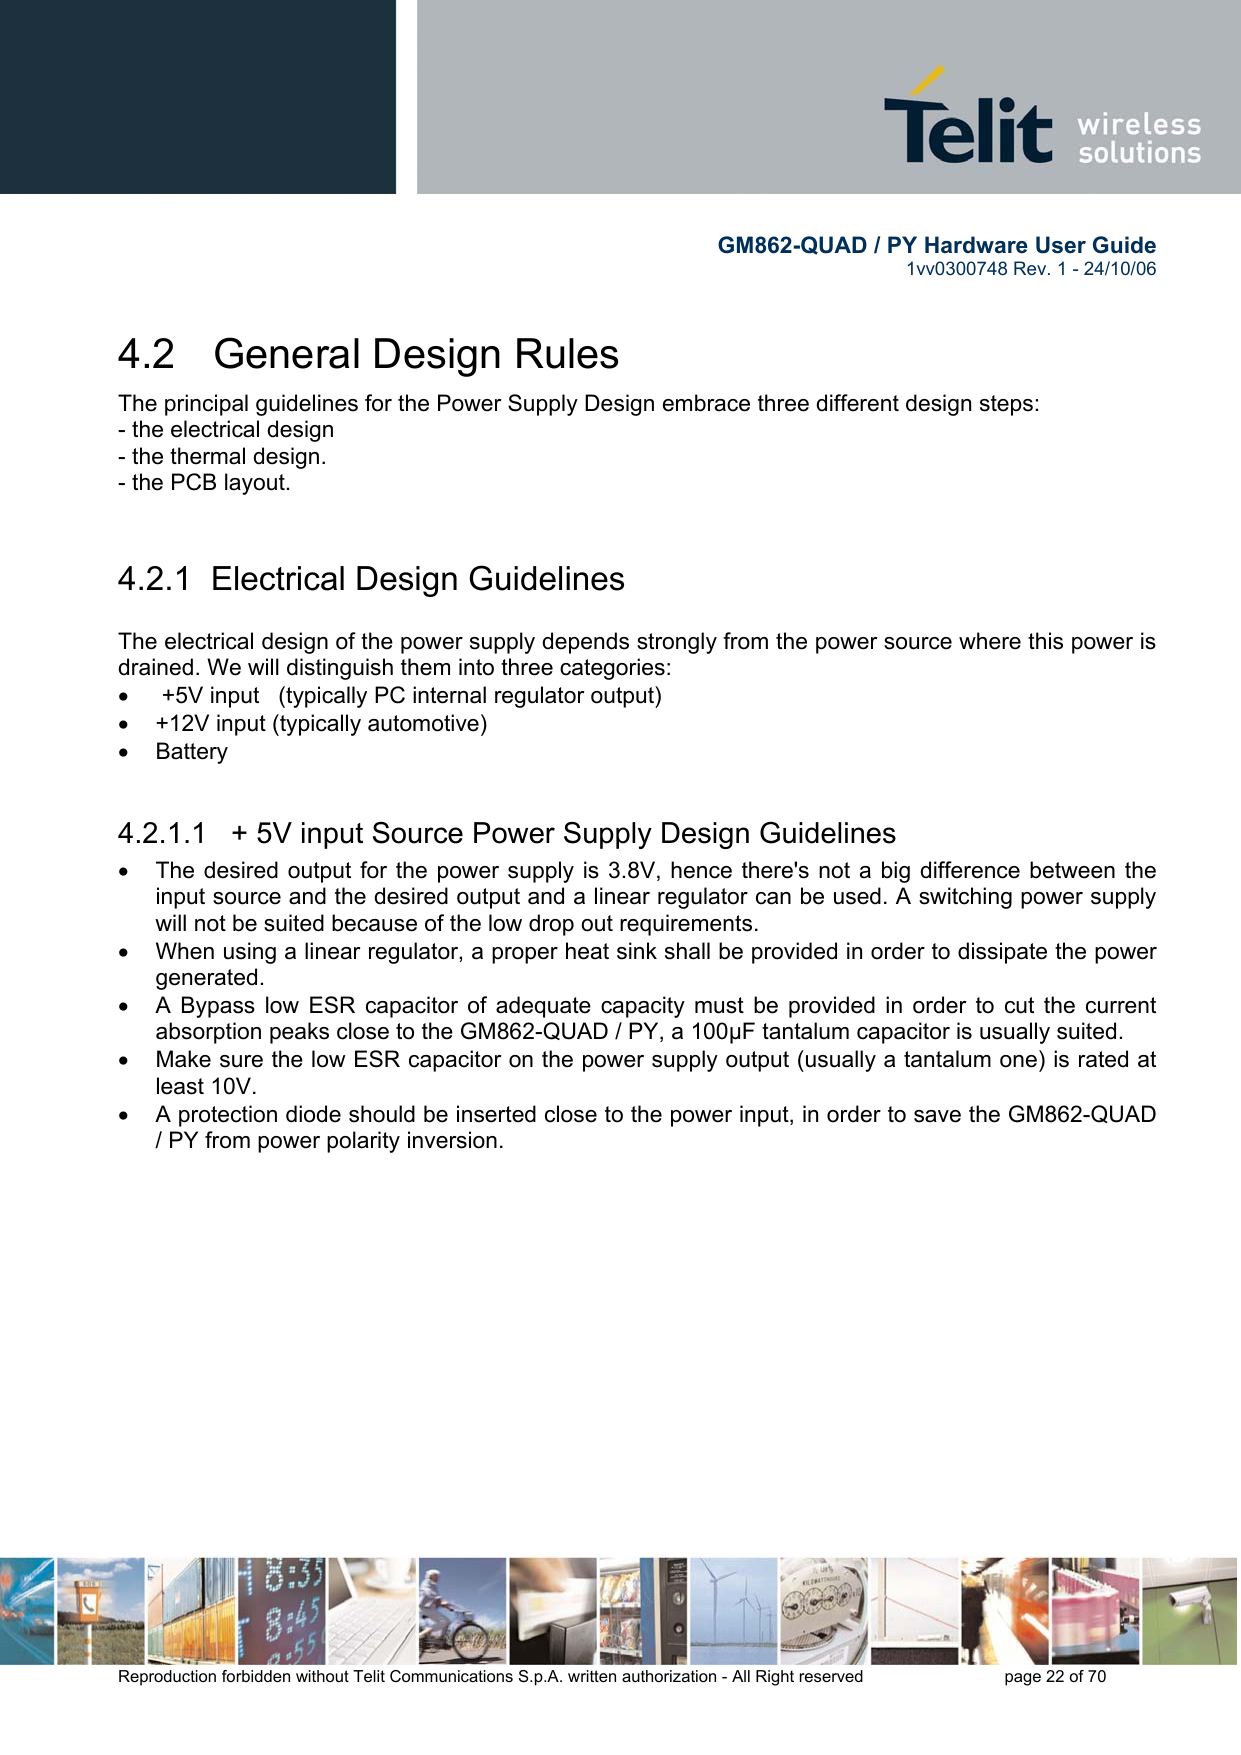        GM862-QUAD / PY Hardware User Guide   1vv0300748 Rev. 1 - 24/10/06    Reproduction forbidden without Telit Communications S.p.A. written authorization - All Right reserved    page 22 of 70  4.2   General Design Rules The principal guidelines for the Power Supply Design embrace three different design steps: - the electrical design - the thermal design. - the PCB layout.  4.2.1  Electrical Design Guidelines  The electrical design of the power supply depends strongly from the power source where this power is drained. We will distinguish them into three categories: •   +5V input   (typically PC internal regulator output) •  +12V input (typically automotive) •  Battery  4.2.1.1   + 5V input Source Power Supply Design Guidelines •  The desired output for the power supply is 3.8V, hence there&apos;s not a big difference between the input source and the desired output and a linear regulator can be used. A switching power supply will not be suited because of the low drop out requirements. •  When using a linear regulator, a proper heat sink shall be provided in order to dissipate the power generated. •  A Bypass low ESR capacitor of adequate capacity must be provided in order to cut the current absorption peaks close to the GM862-QUAD / PY, a 100μF tantalum capacitor is usually suited. •  Make sure the low ESR capacitor on the power supply output (usually a tantalum one) is rated at least 10V. •  A protection diode should be inserted close to the power input, in order to save the GM862-QUAD / PY from power polarity inversion. 